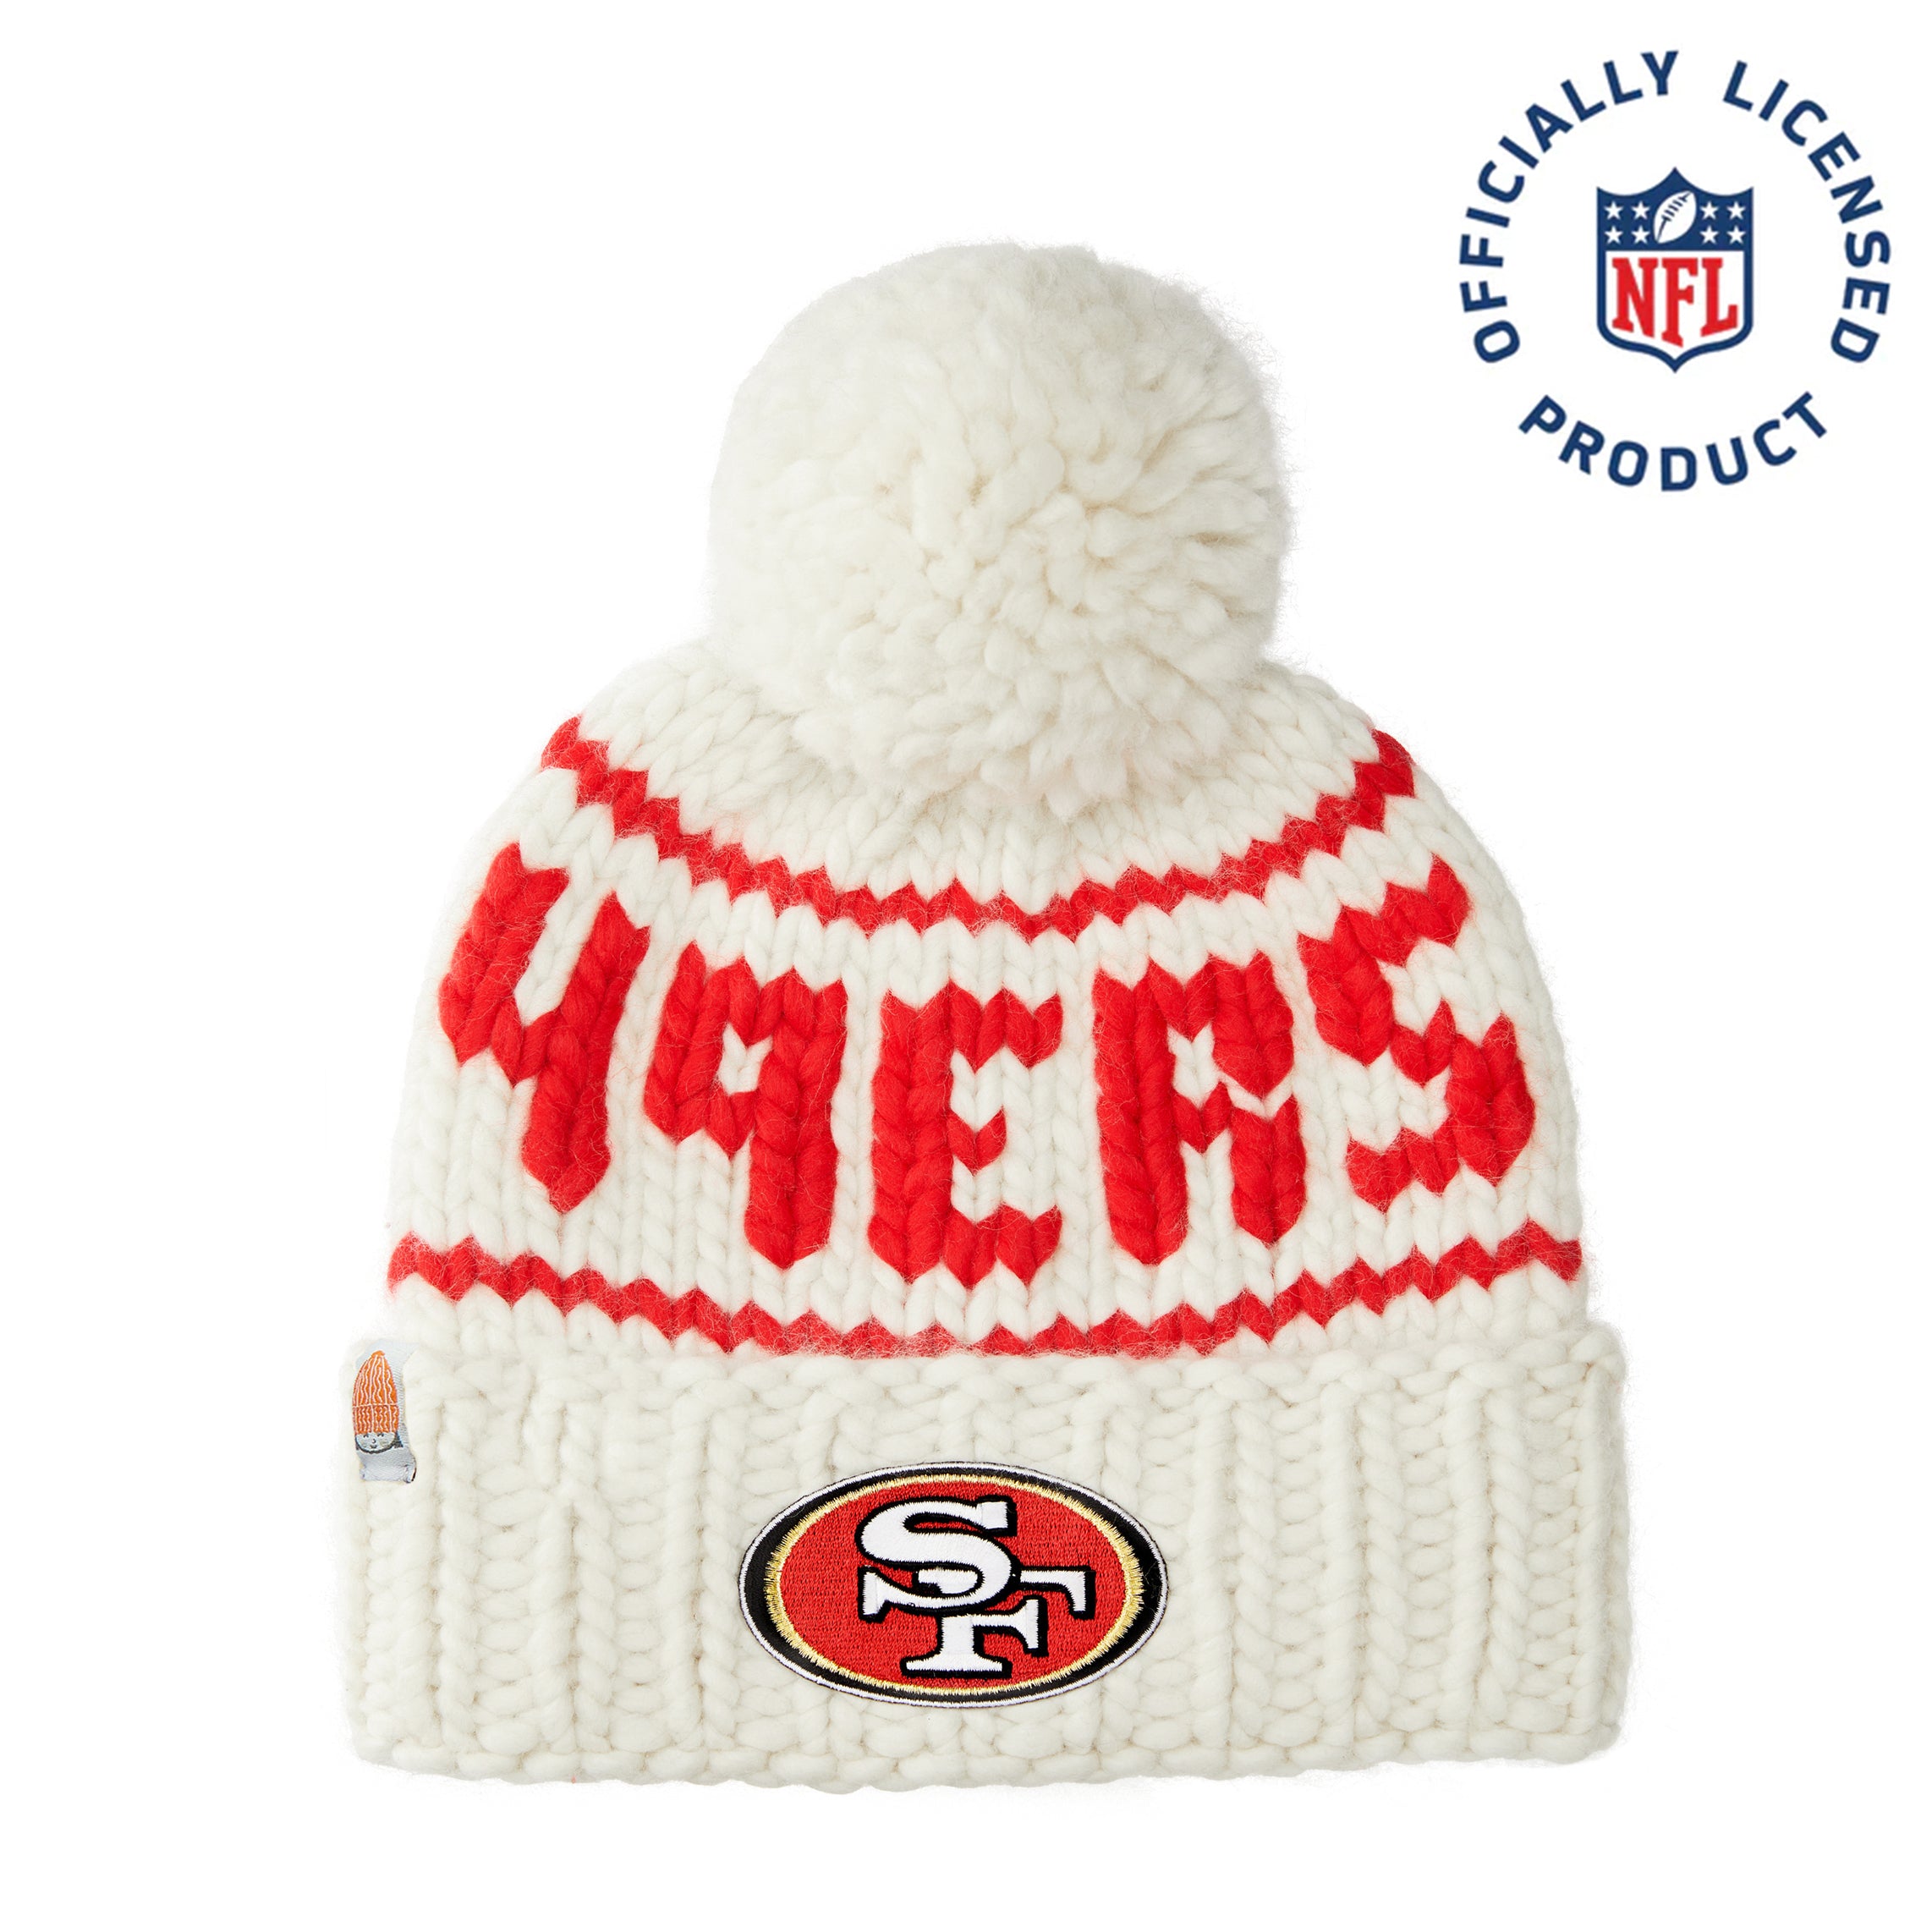 Officially Licensed NFL Women's Knit Snowy Hat by New Era